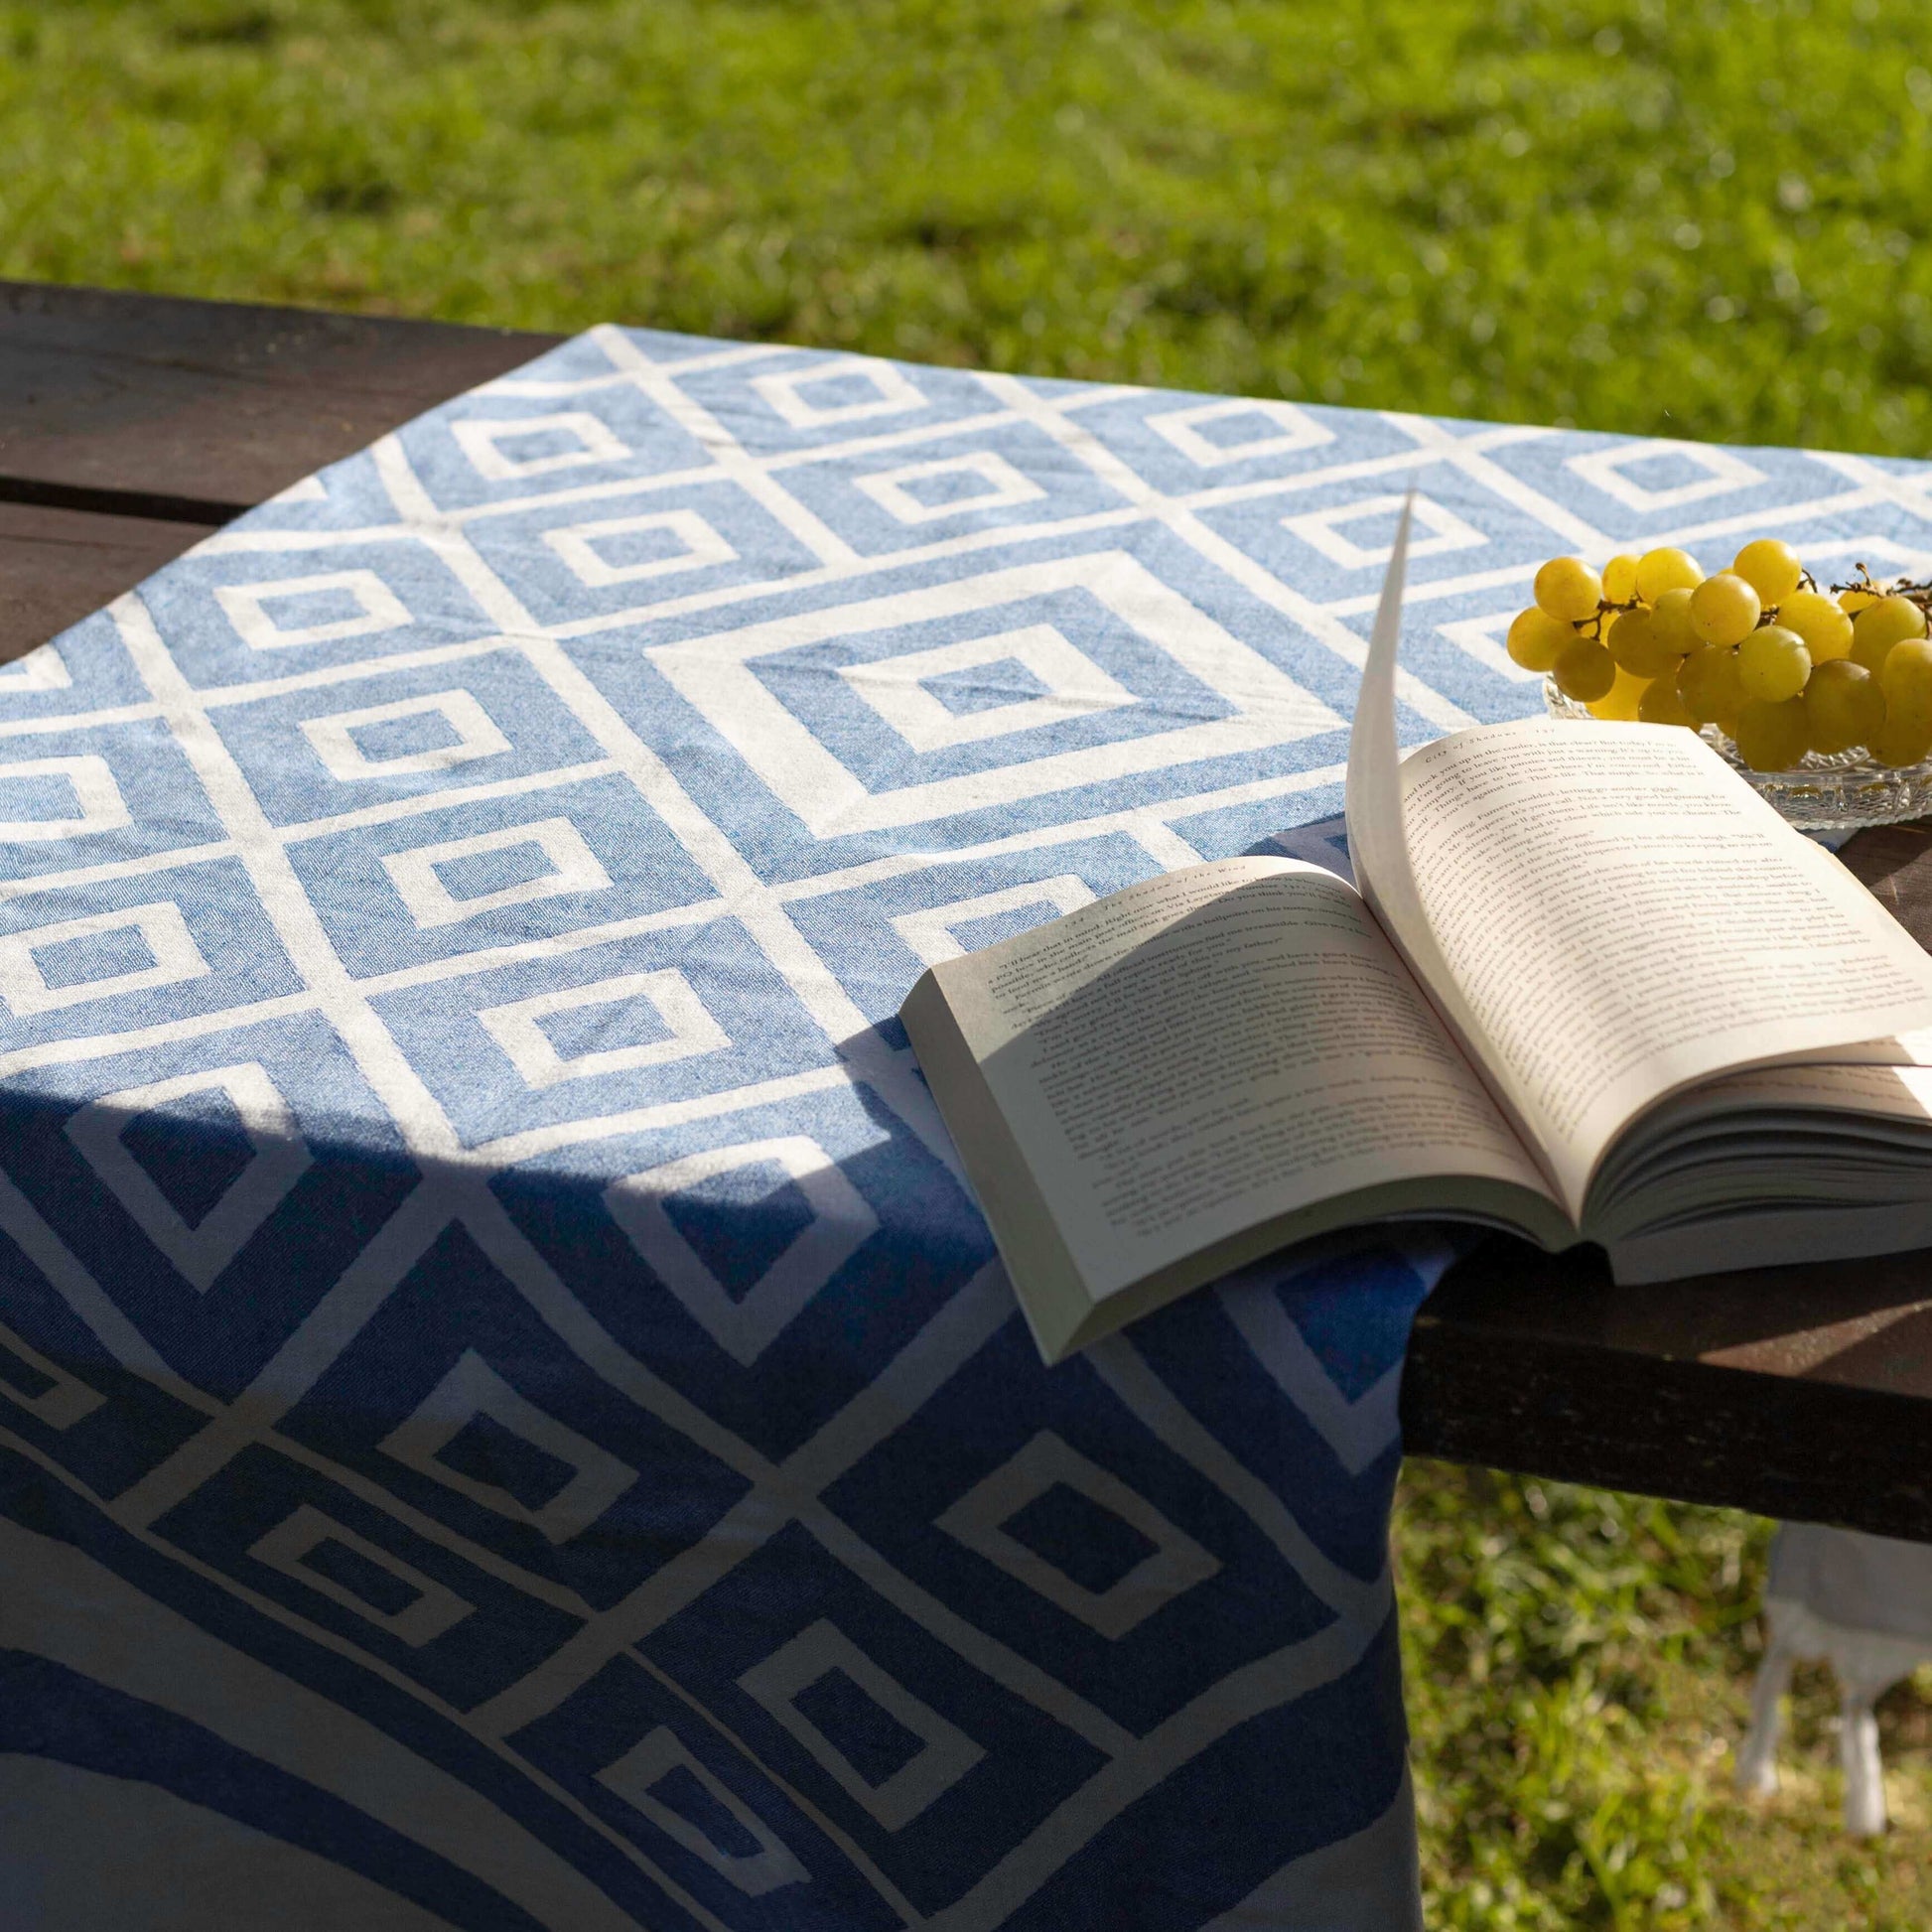 White and blue Turkish towel picnic tablecloth summer